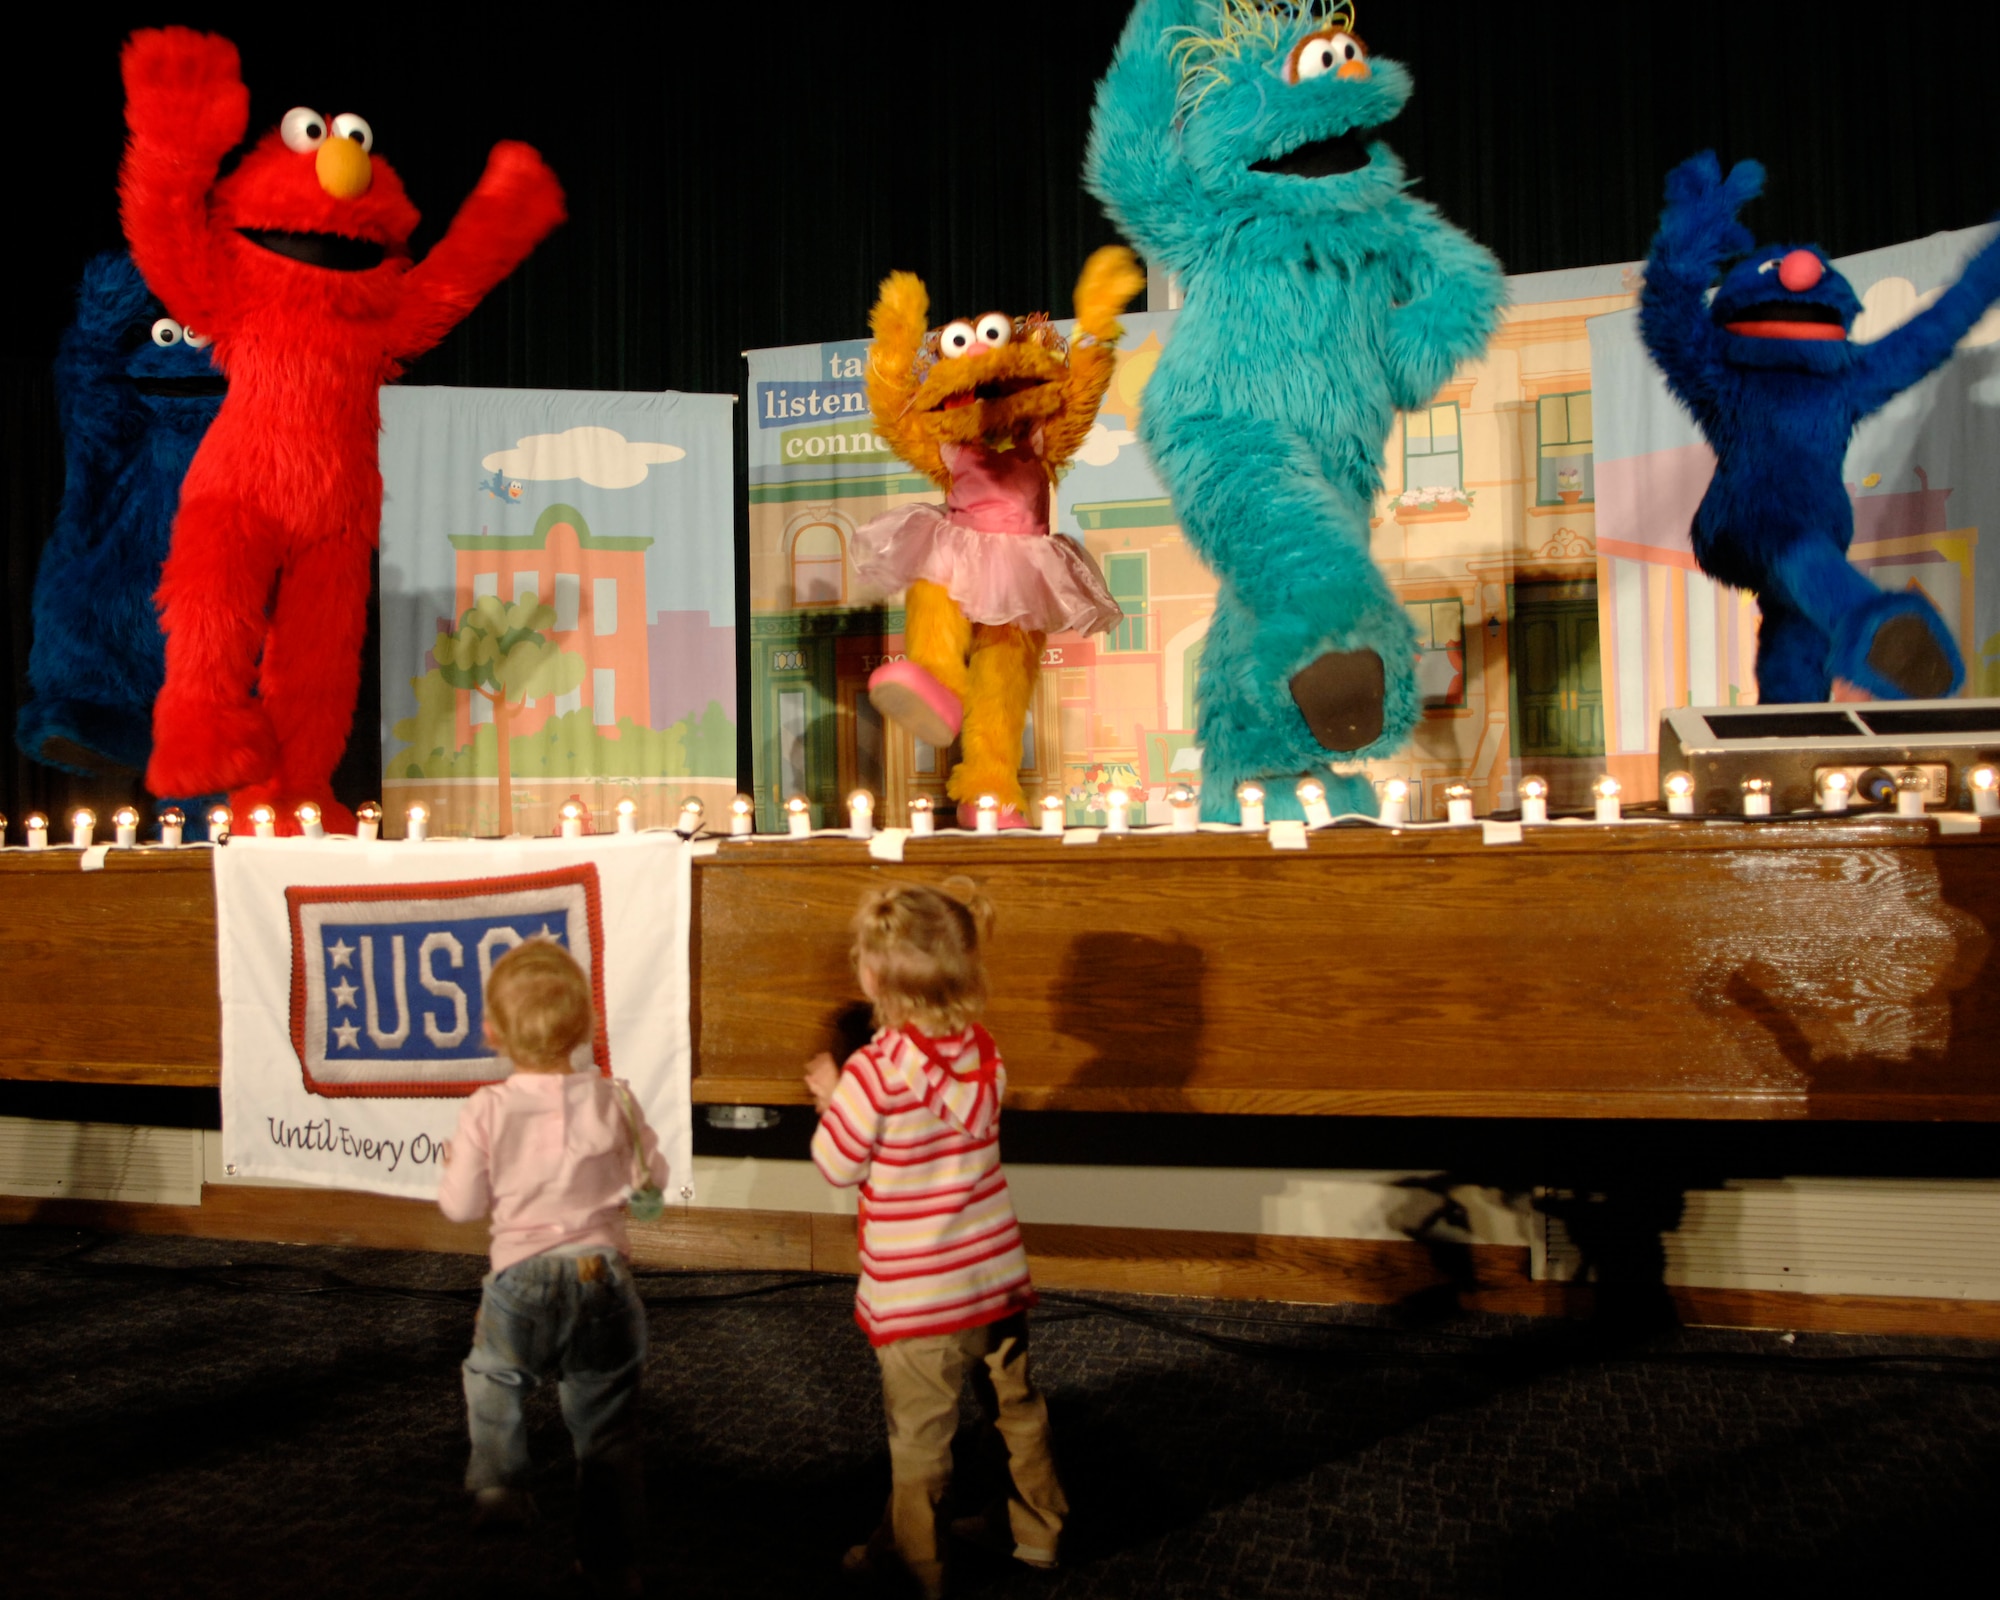 Cookie Monster, Elmo, Zoe, Rosita, and Grover sing and dance to several of their hits such as “Somebody Come and Play,” and the “Sesame Street” theme song during “The Sesame Street Experience for Military Families” USO Tour Oct. 16 and 17 at the base theater. Military families who attended the show received giveaways and outreach materials from Talk, Listen, Connect and other partners that sponsored this free event. (U.S. Air Force photo/Senior Airman Steven R. Doty)